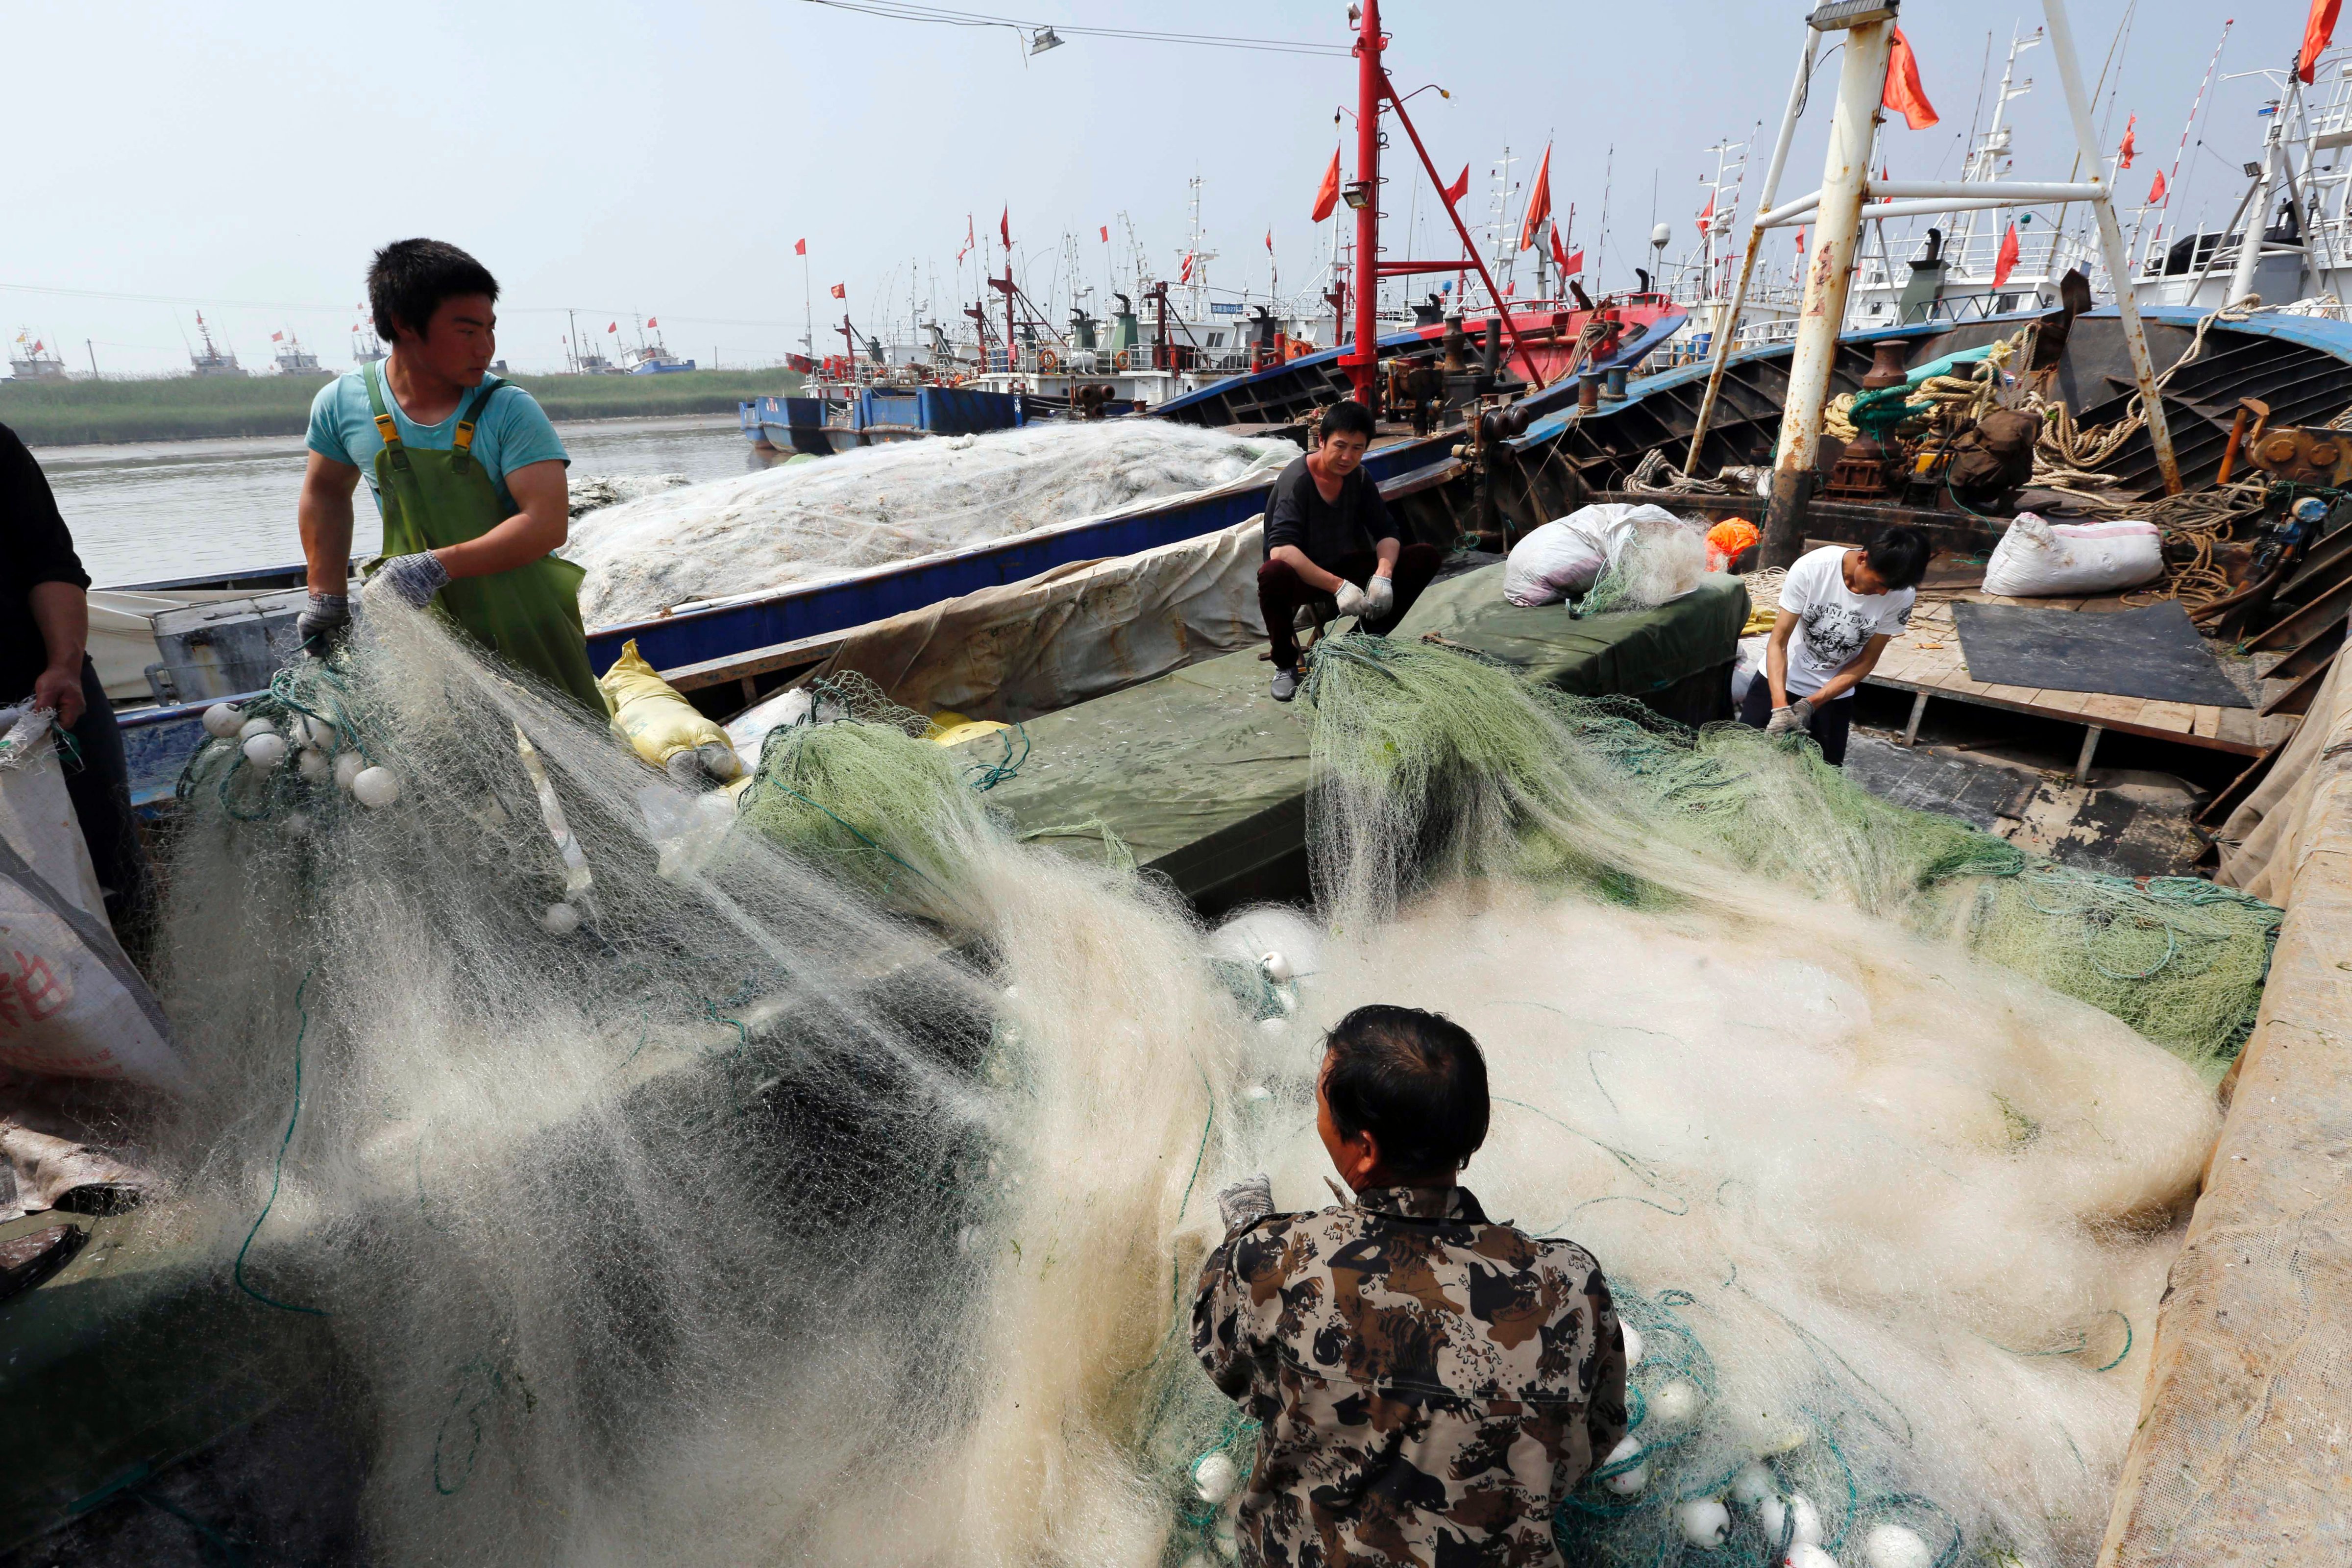 Fishermen unload fishing gear at a port in Lianyuangang, in eastern China's Jiangsu province, on May 30, 2016 (STR/AFP/Getty Images)